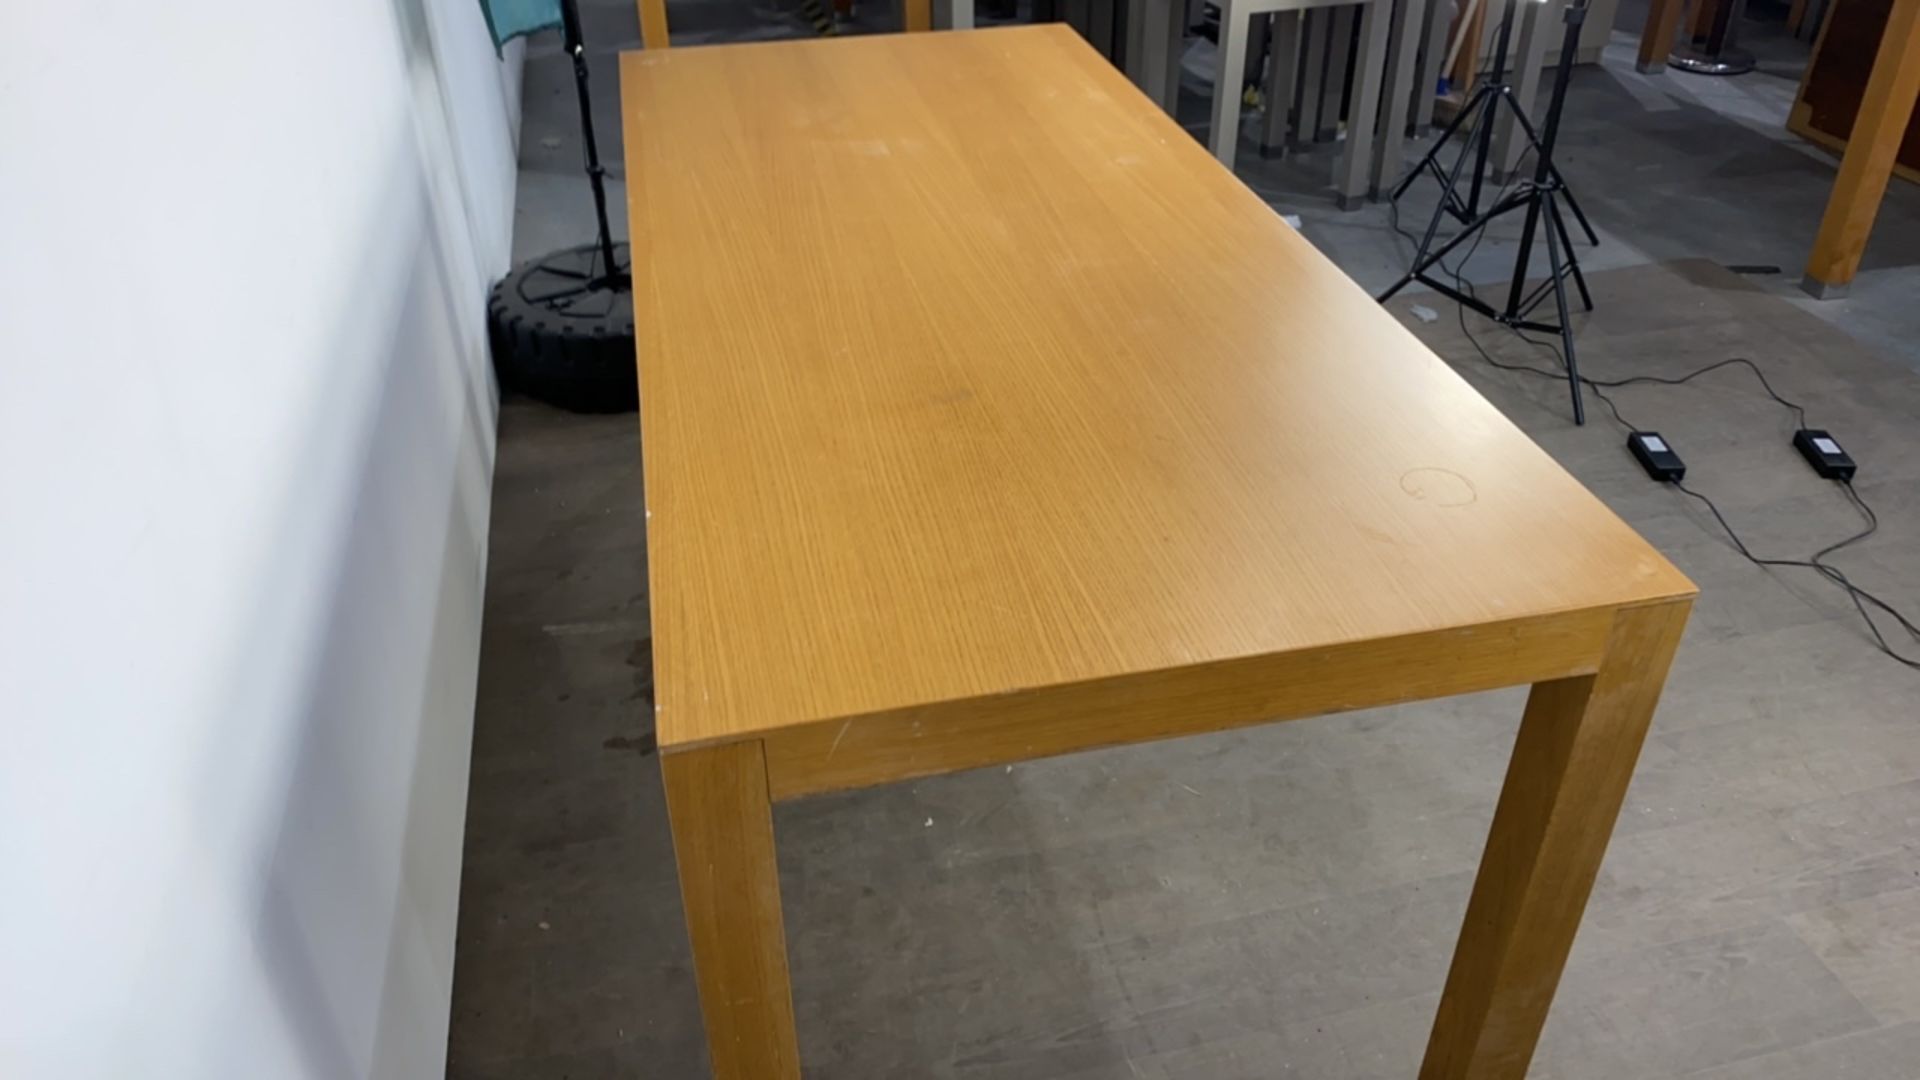 Large Wooden Table With Chromed Feet - Image 4 of 4